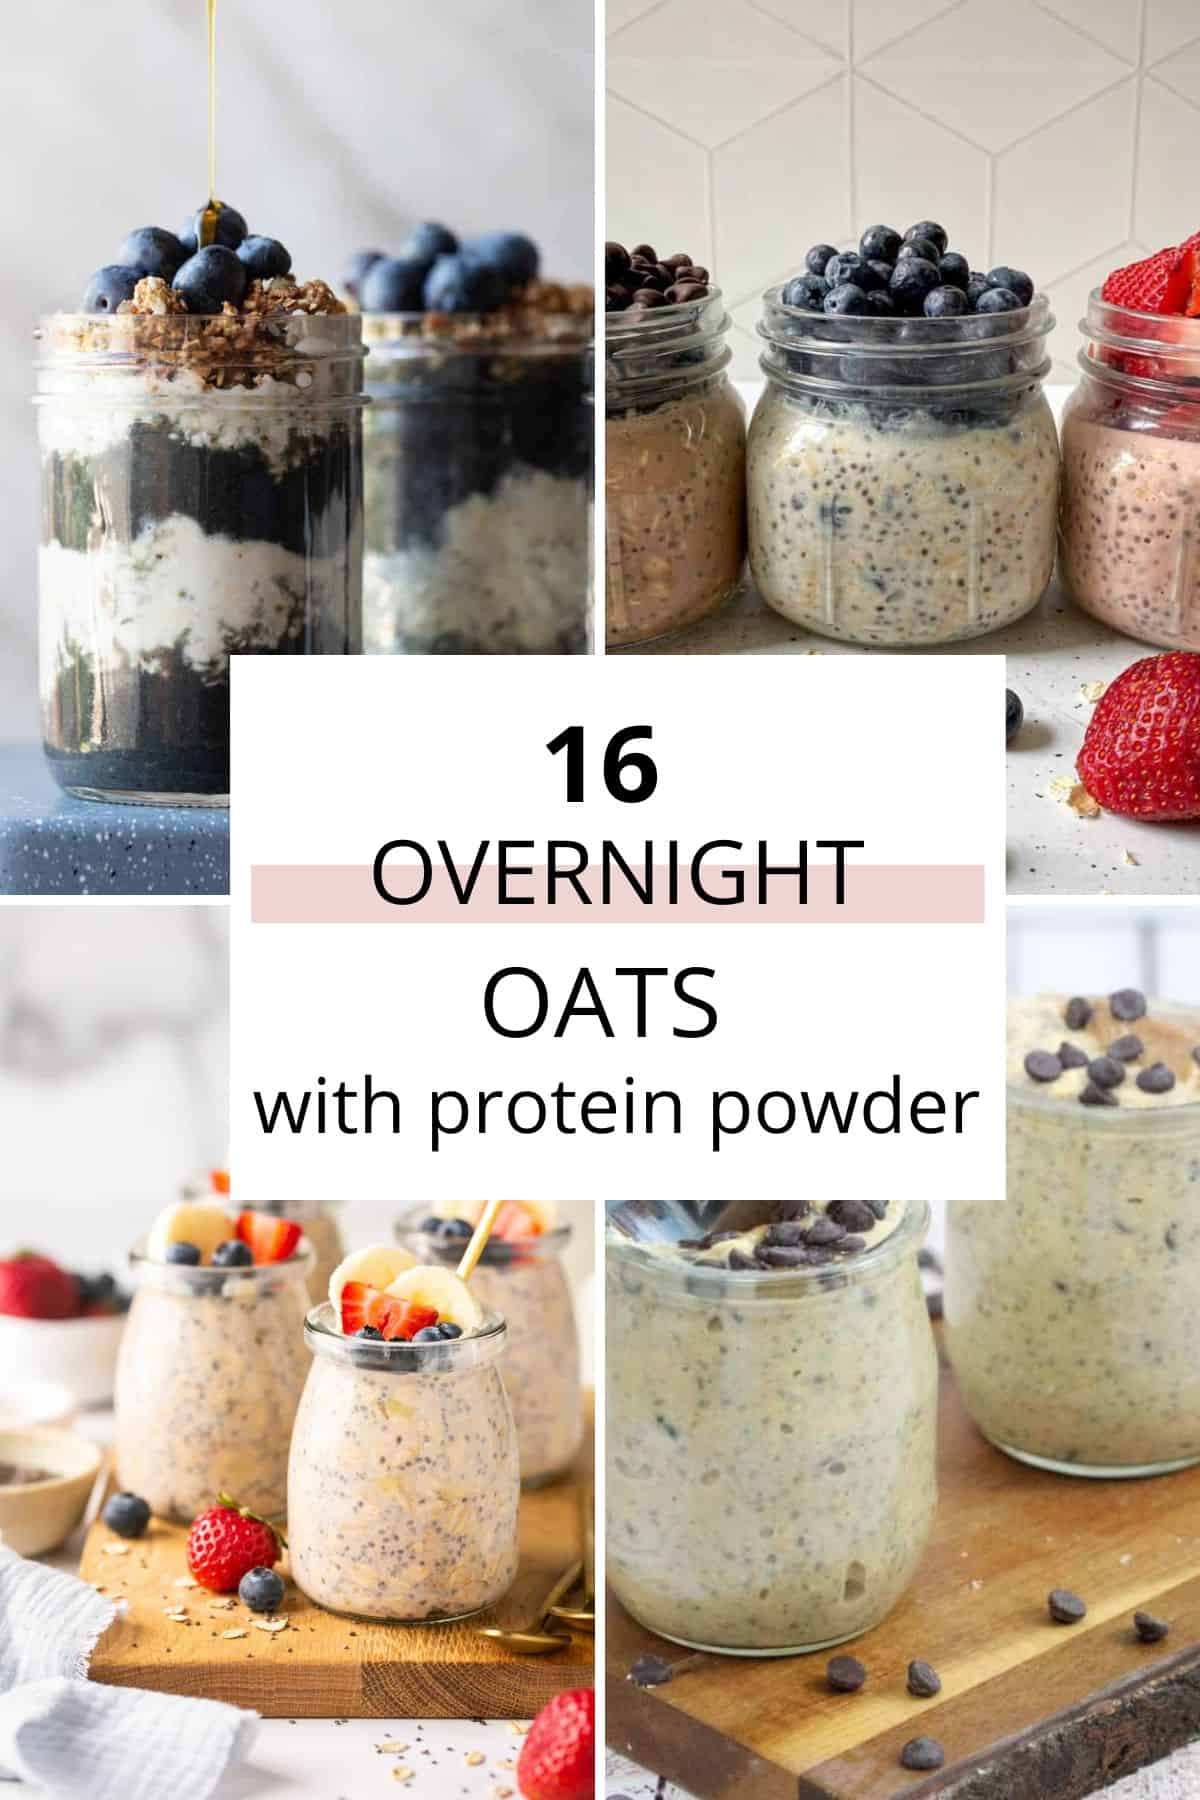 A compilation of images showcasing various servings of protein oats garnished with fruits like blueberries and strawberries.